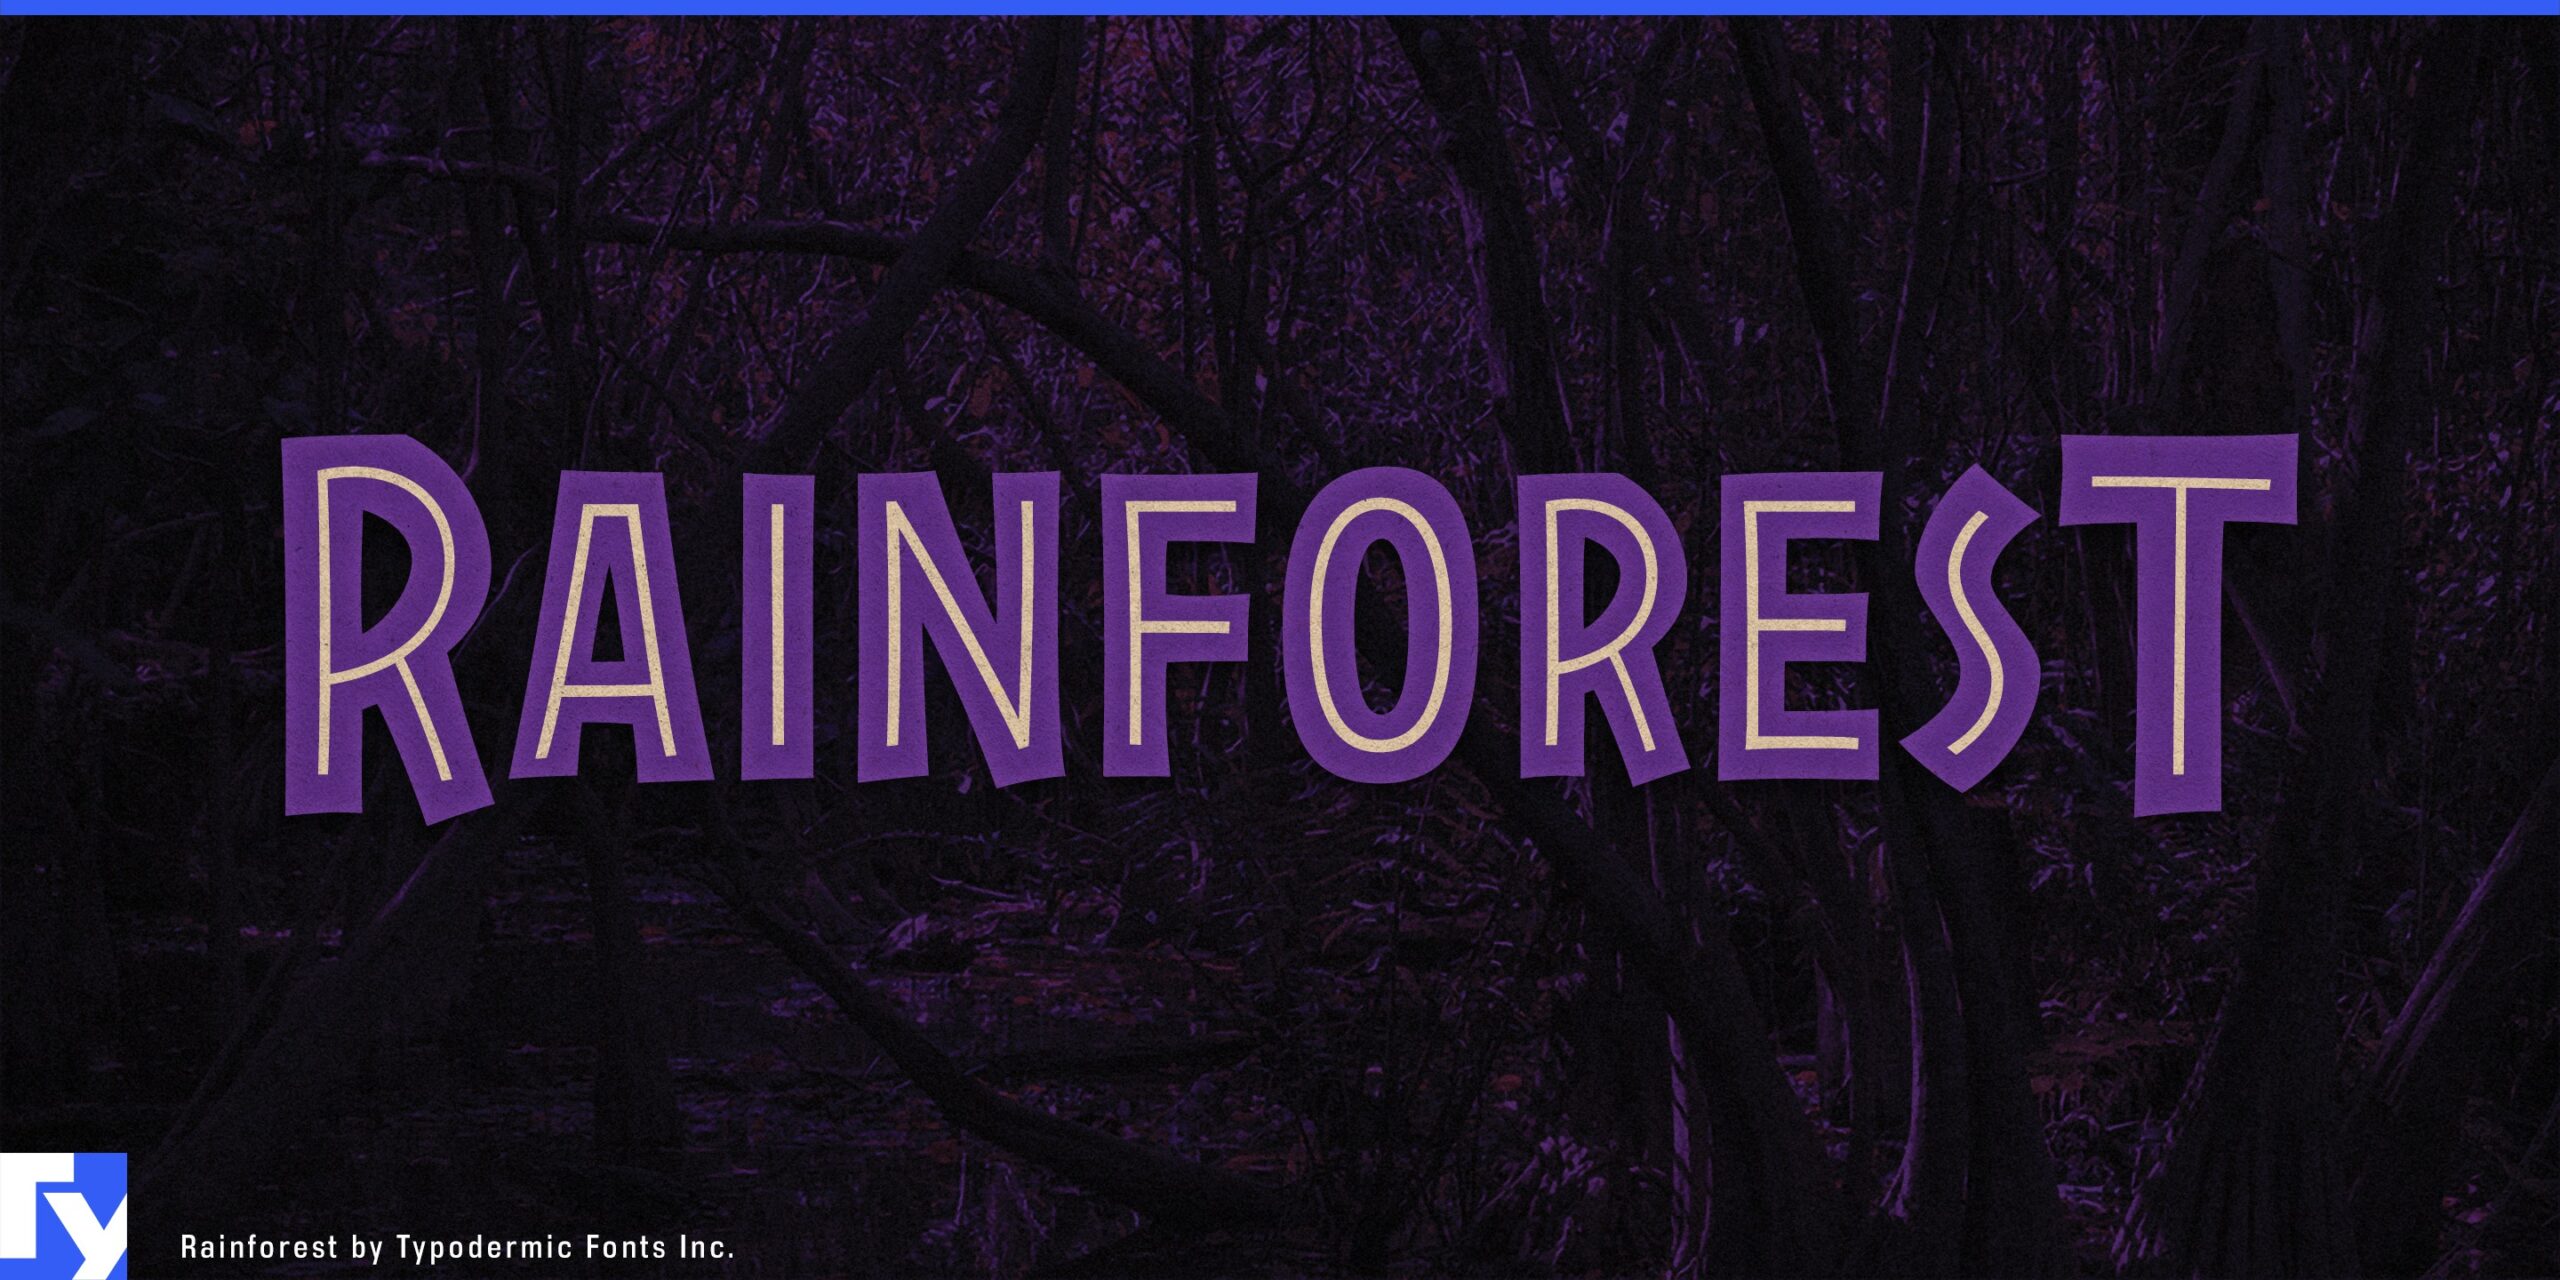 Transport yourself to the heart of the rainforest with Rainforest typeface